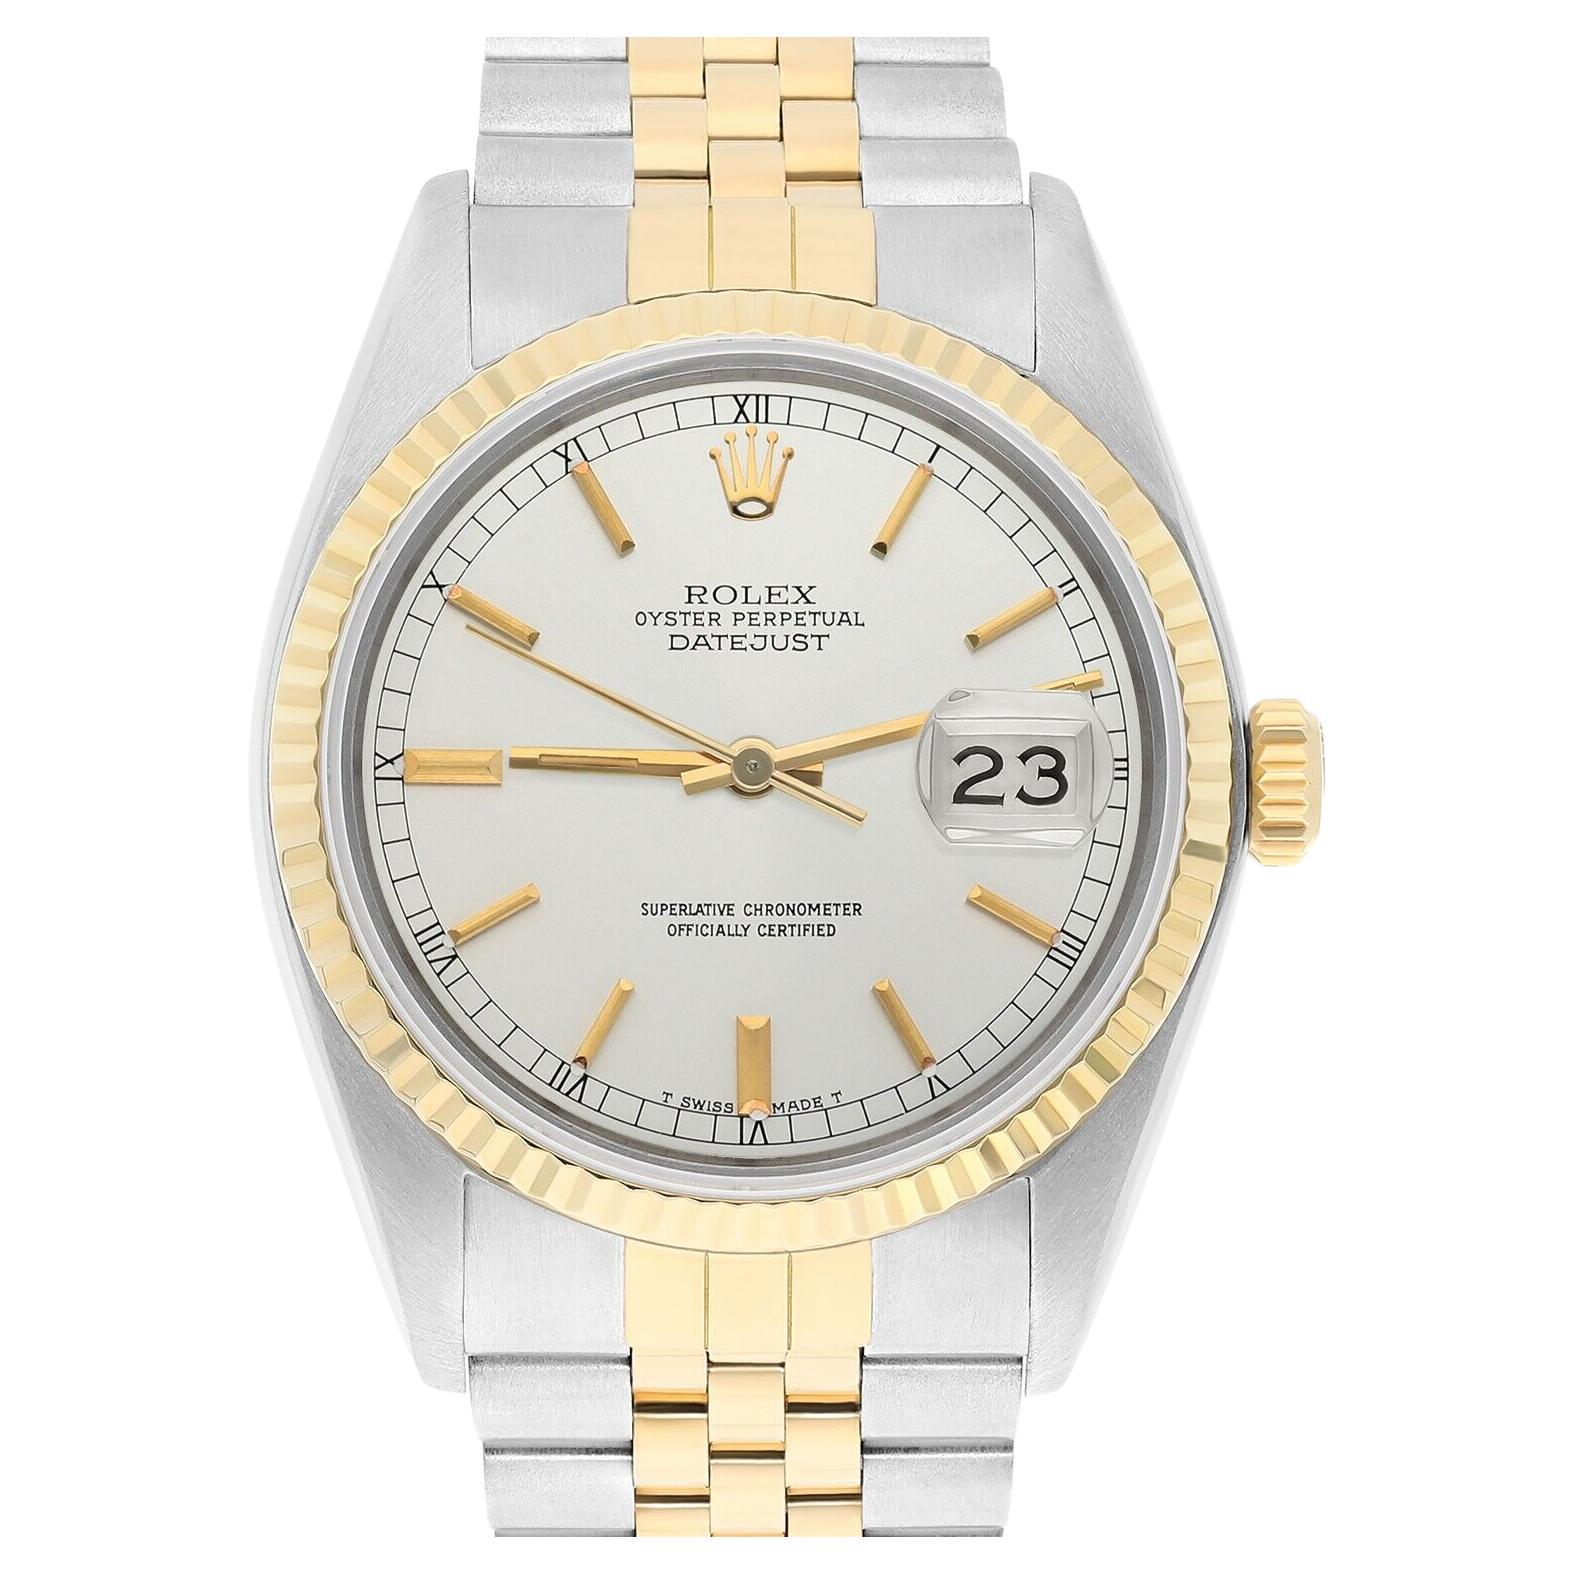 Rolex Datejust 36mm Two Tone Silver lndex Dial Jubilee 16013 Circa 1987 Complete For Sale